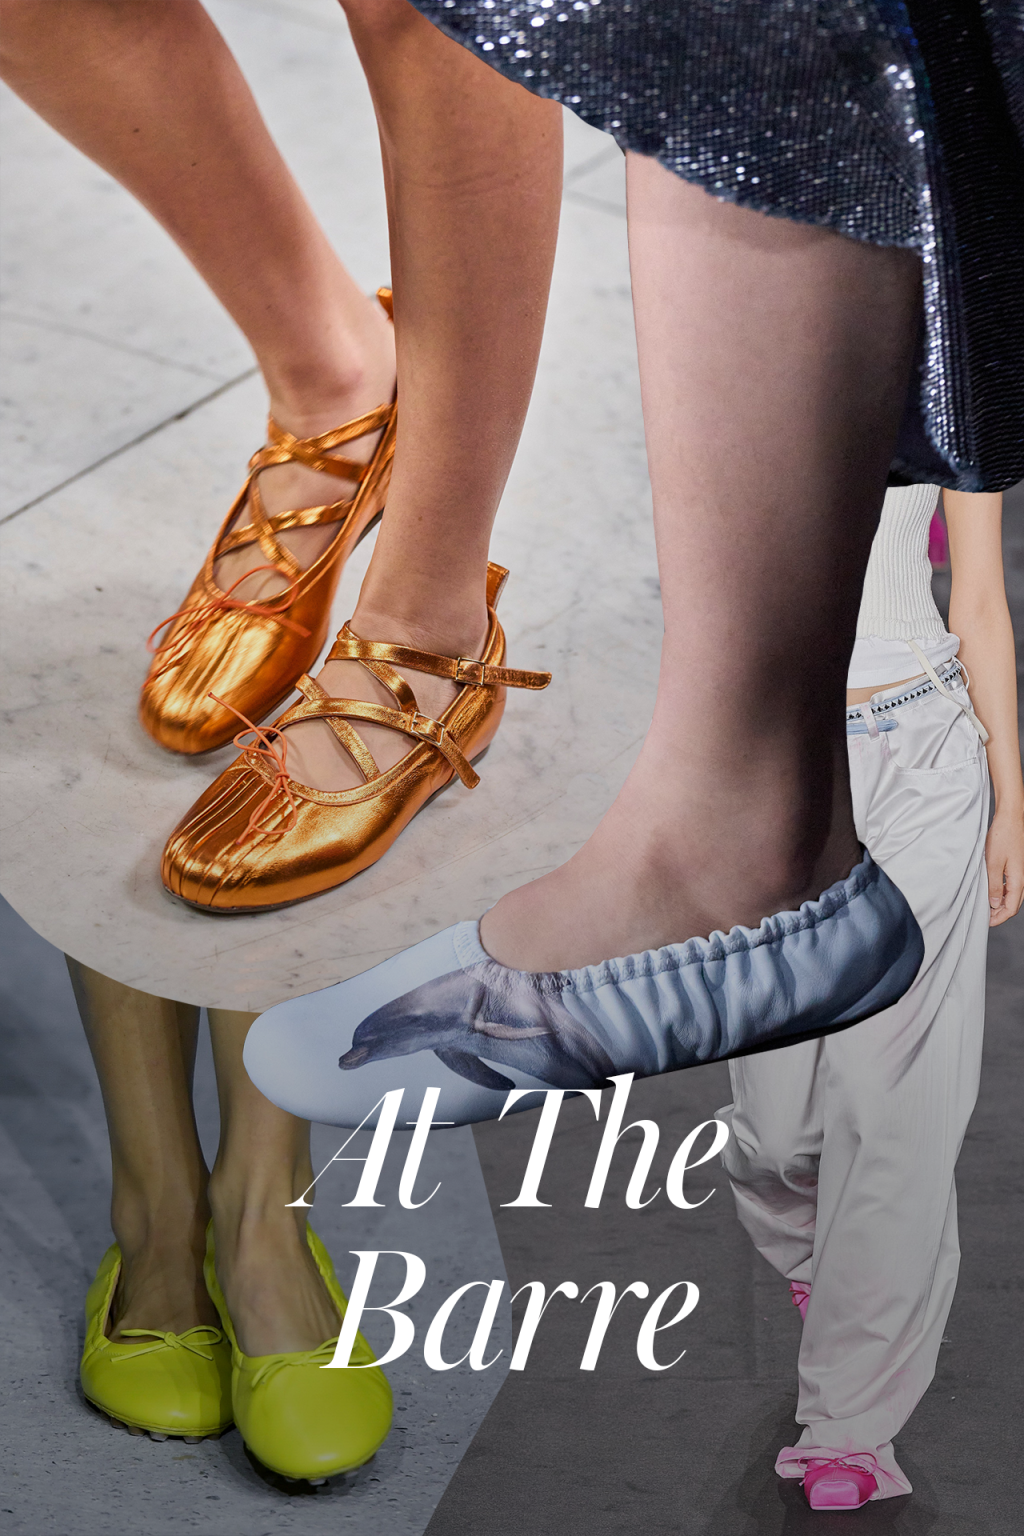 shoes on trend now - The  Major Spring/Summer  Shoe Trends And How To Shop Them